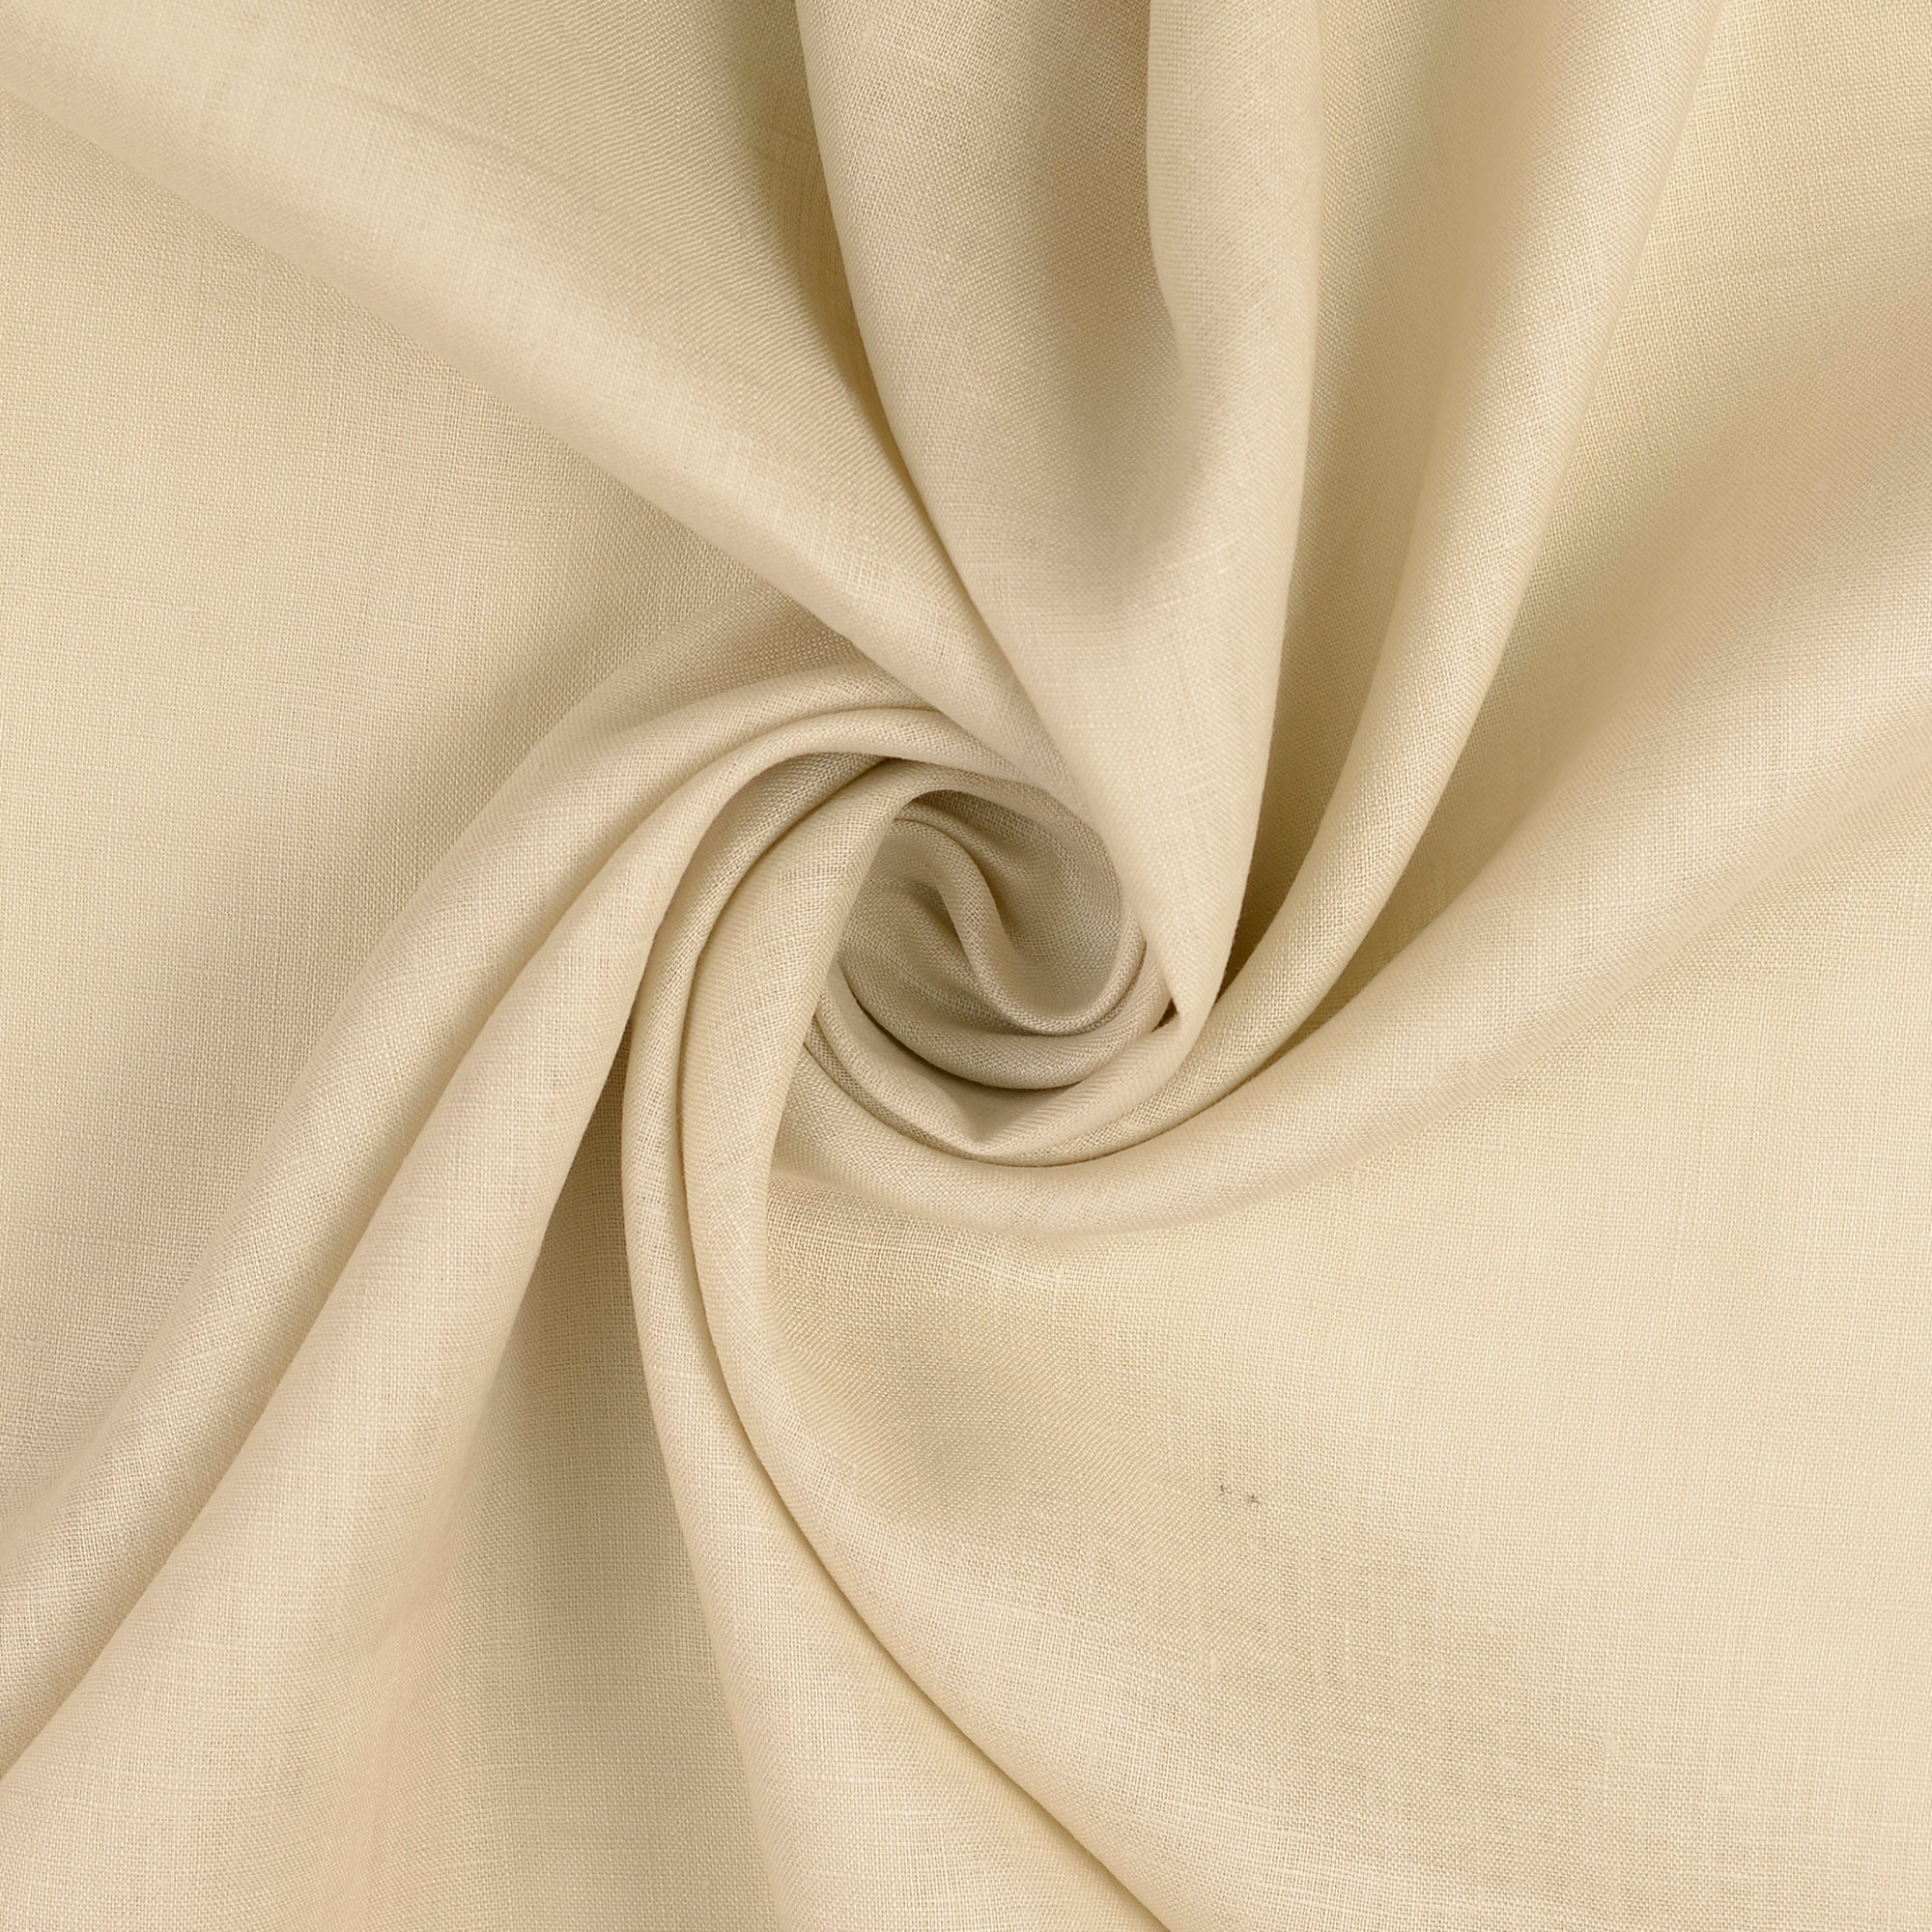 REMNANT 0.47 Metre - Almond Pure Linen Fabric